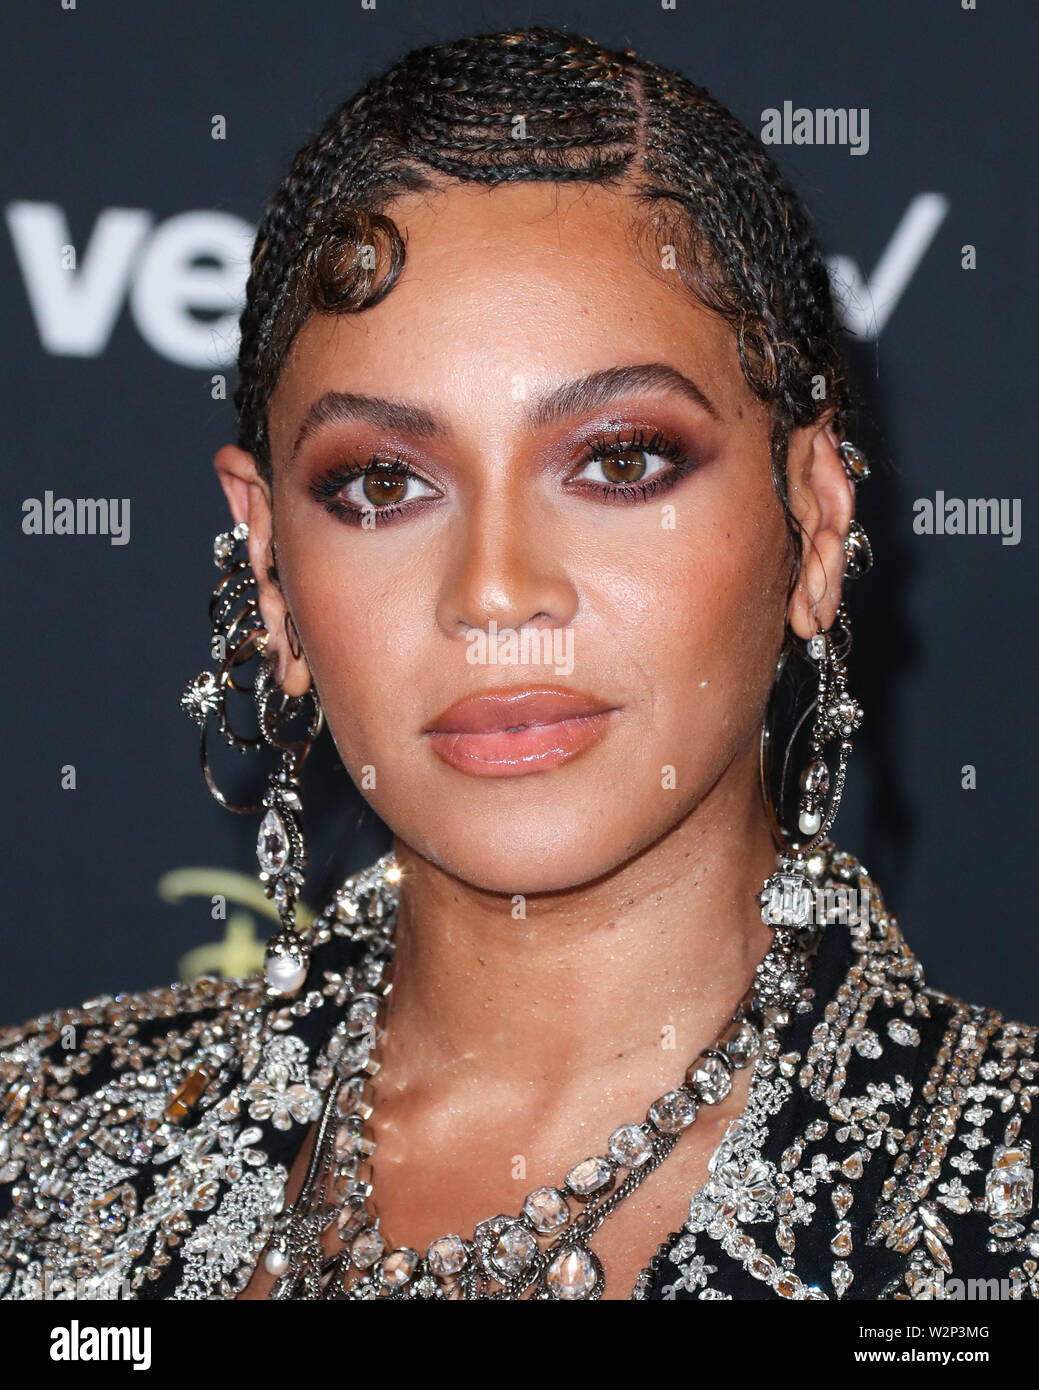 HOLLYWOOD, LOS ANGELES, CALIFORNIA, USA - JULY 09: Singer Beyonce Knowles Carter wearing an outfit by Alexander McQueen and Lorraine Schwartz jewelry arrives at the World Premiere Of Disney's 'The Lion King' held at the Dolby Theatre on July 9, 2019 in Hollywood, Los Angeles, California, United States. (Photo by Xavier Collin/Image Press Agency) Stock Photo